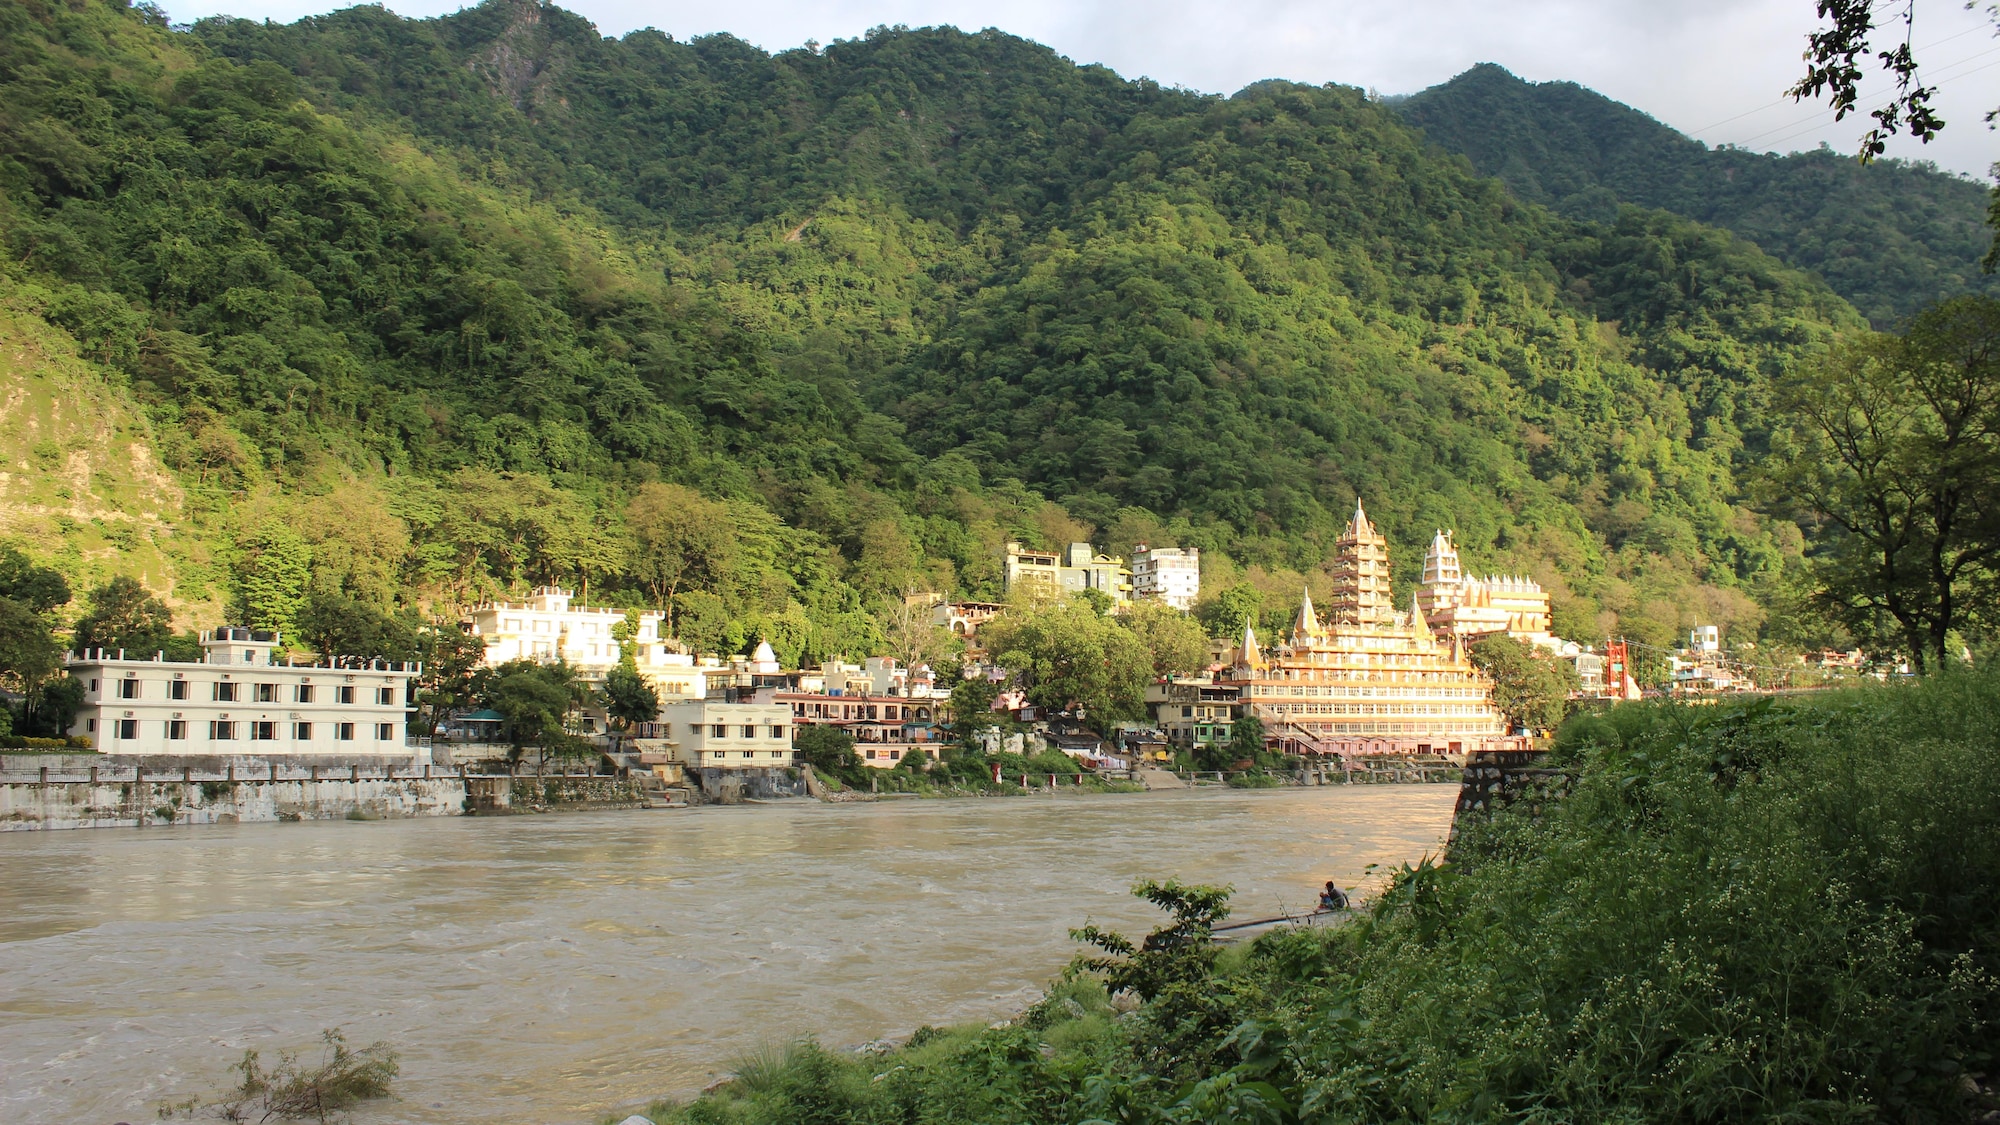 A river flows past buildings with tree-covered hills in the background.